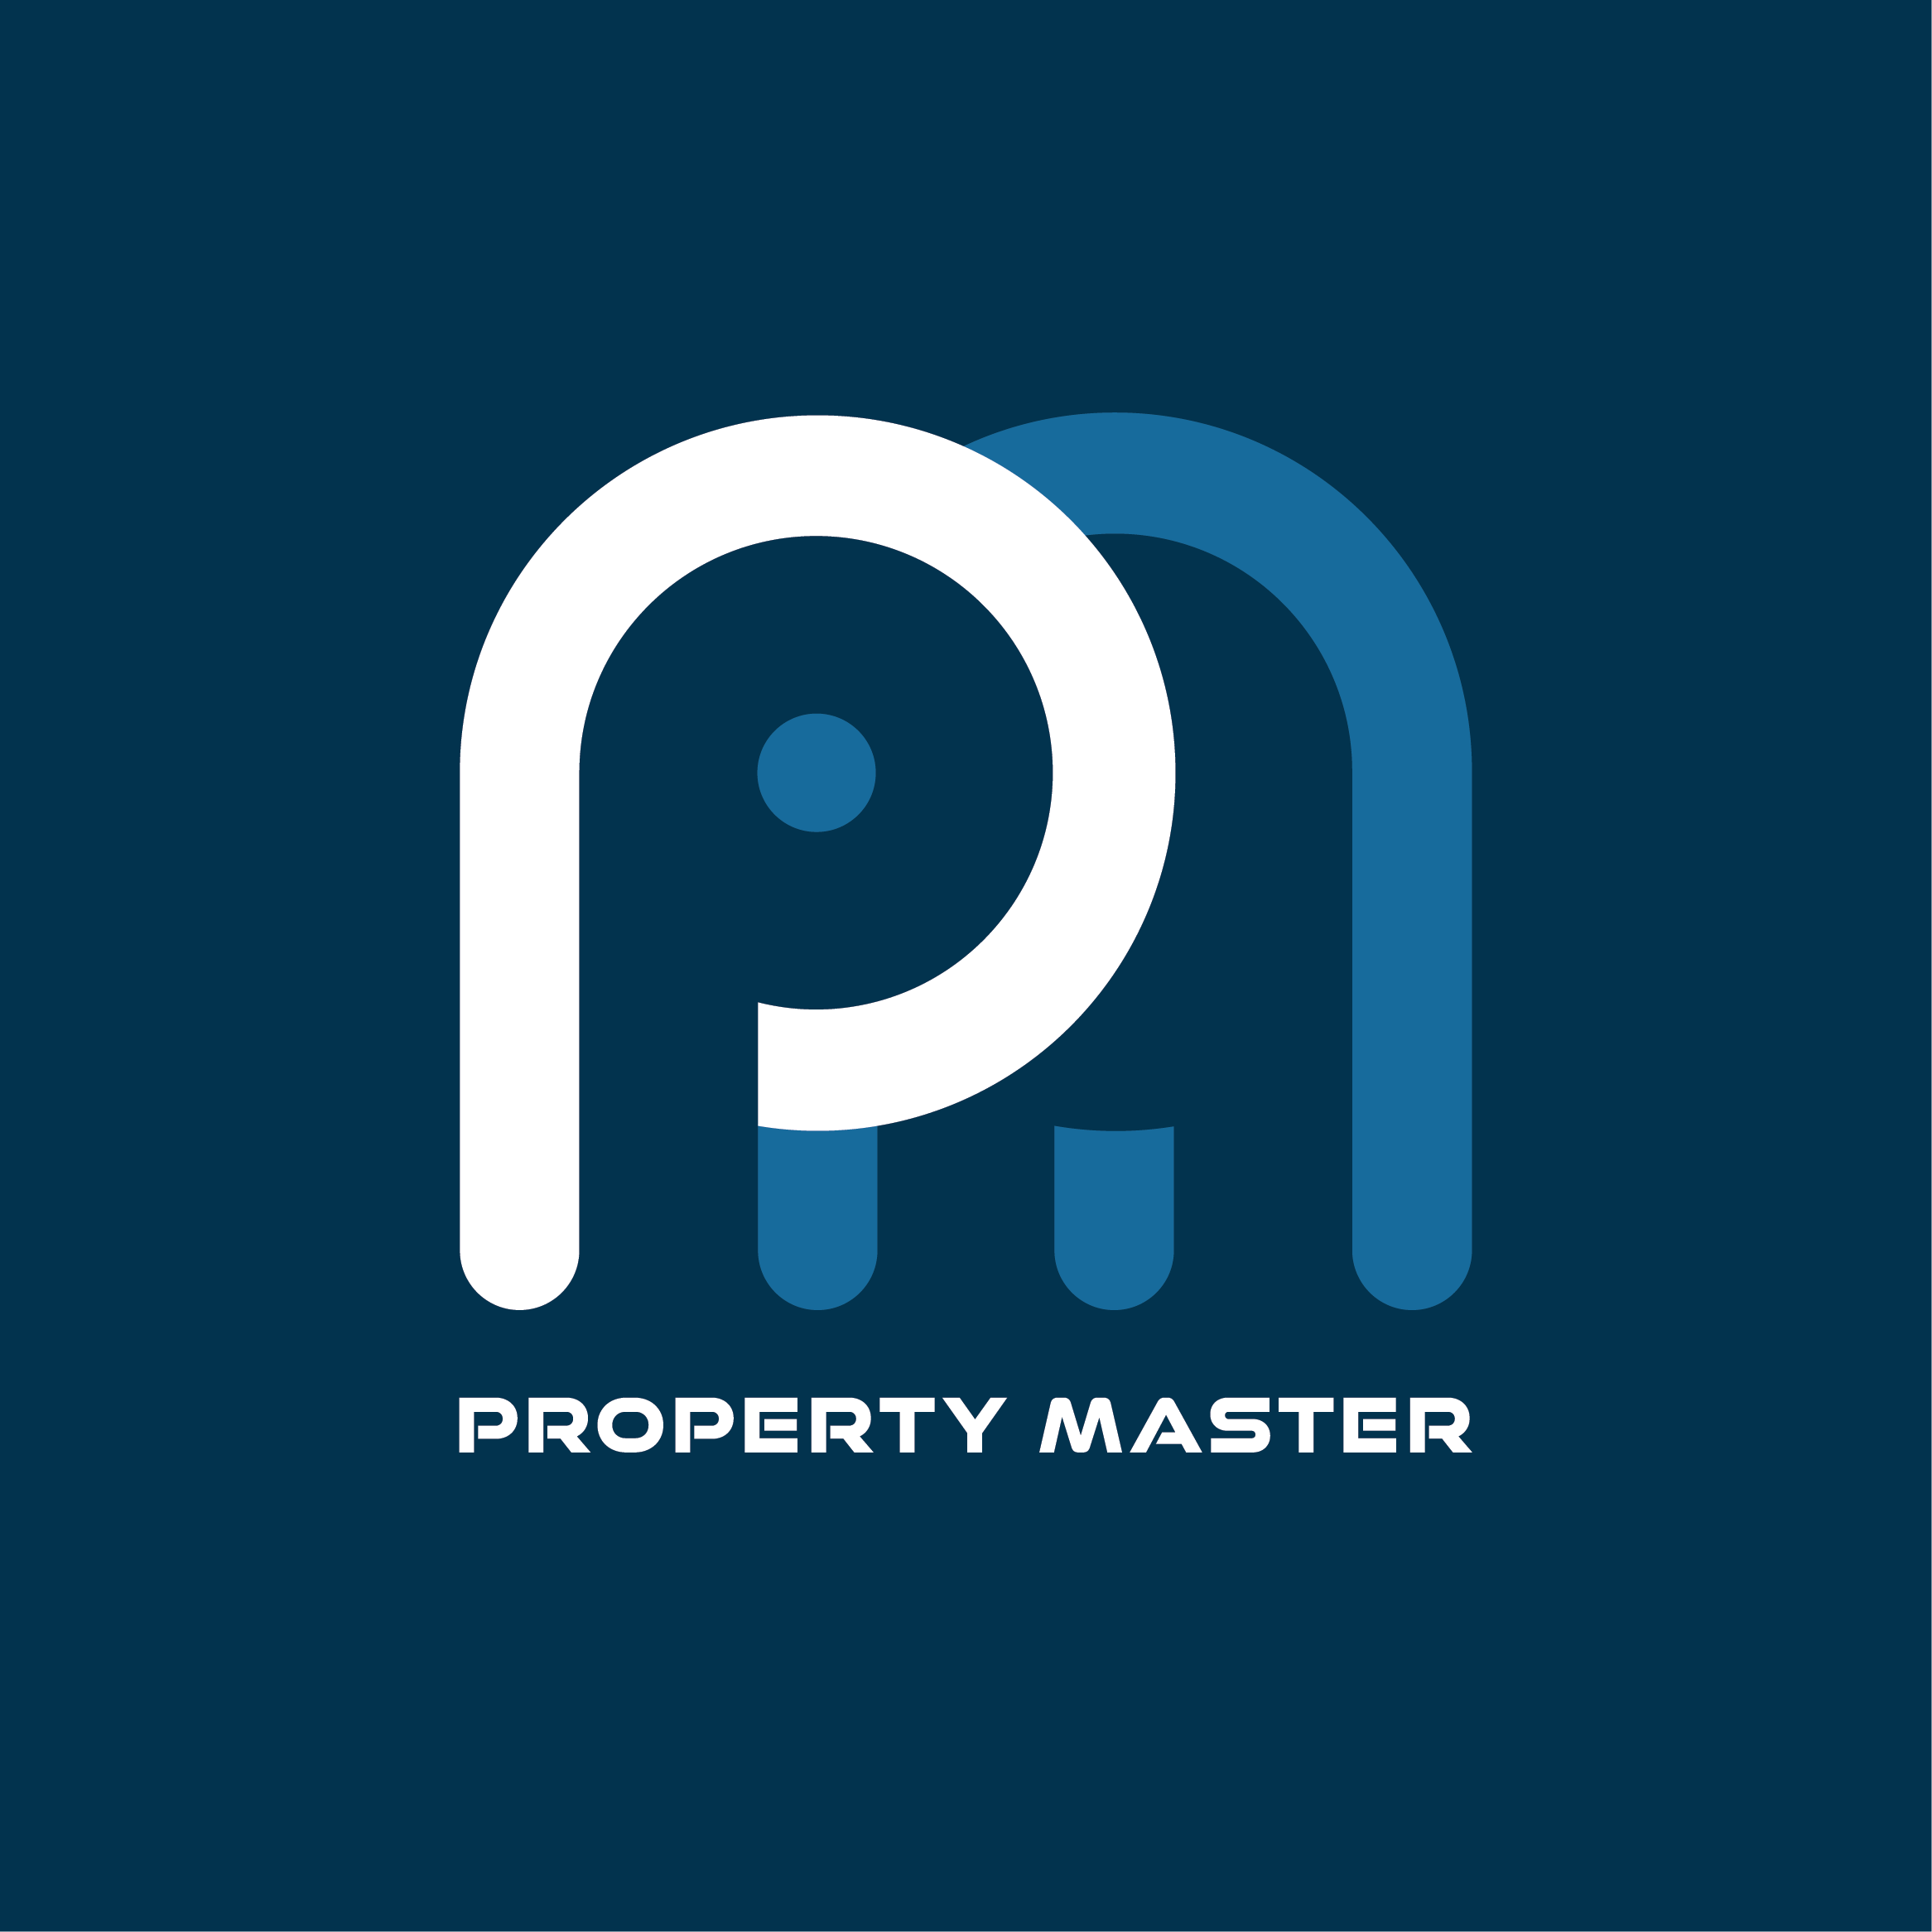 PMASTER SERVICES